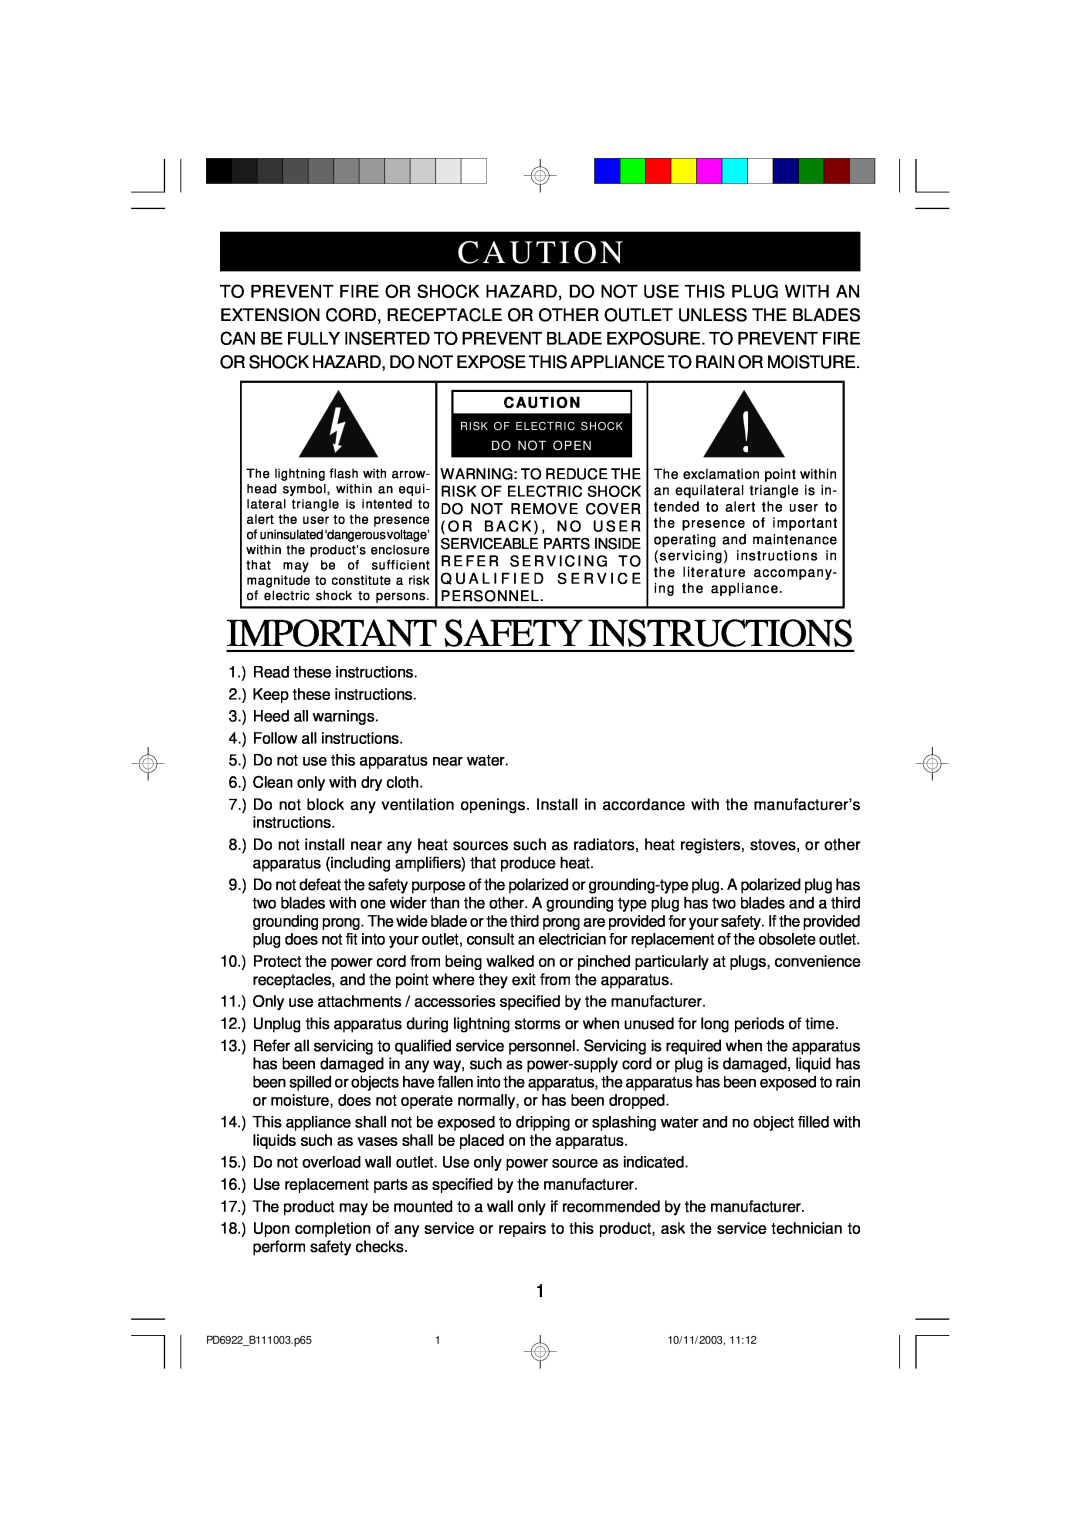 Emerson PD6922 owner manual Important Safety Instructions, Caut I On, Caut I O N 